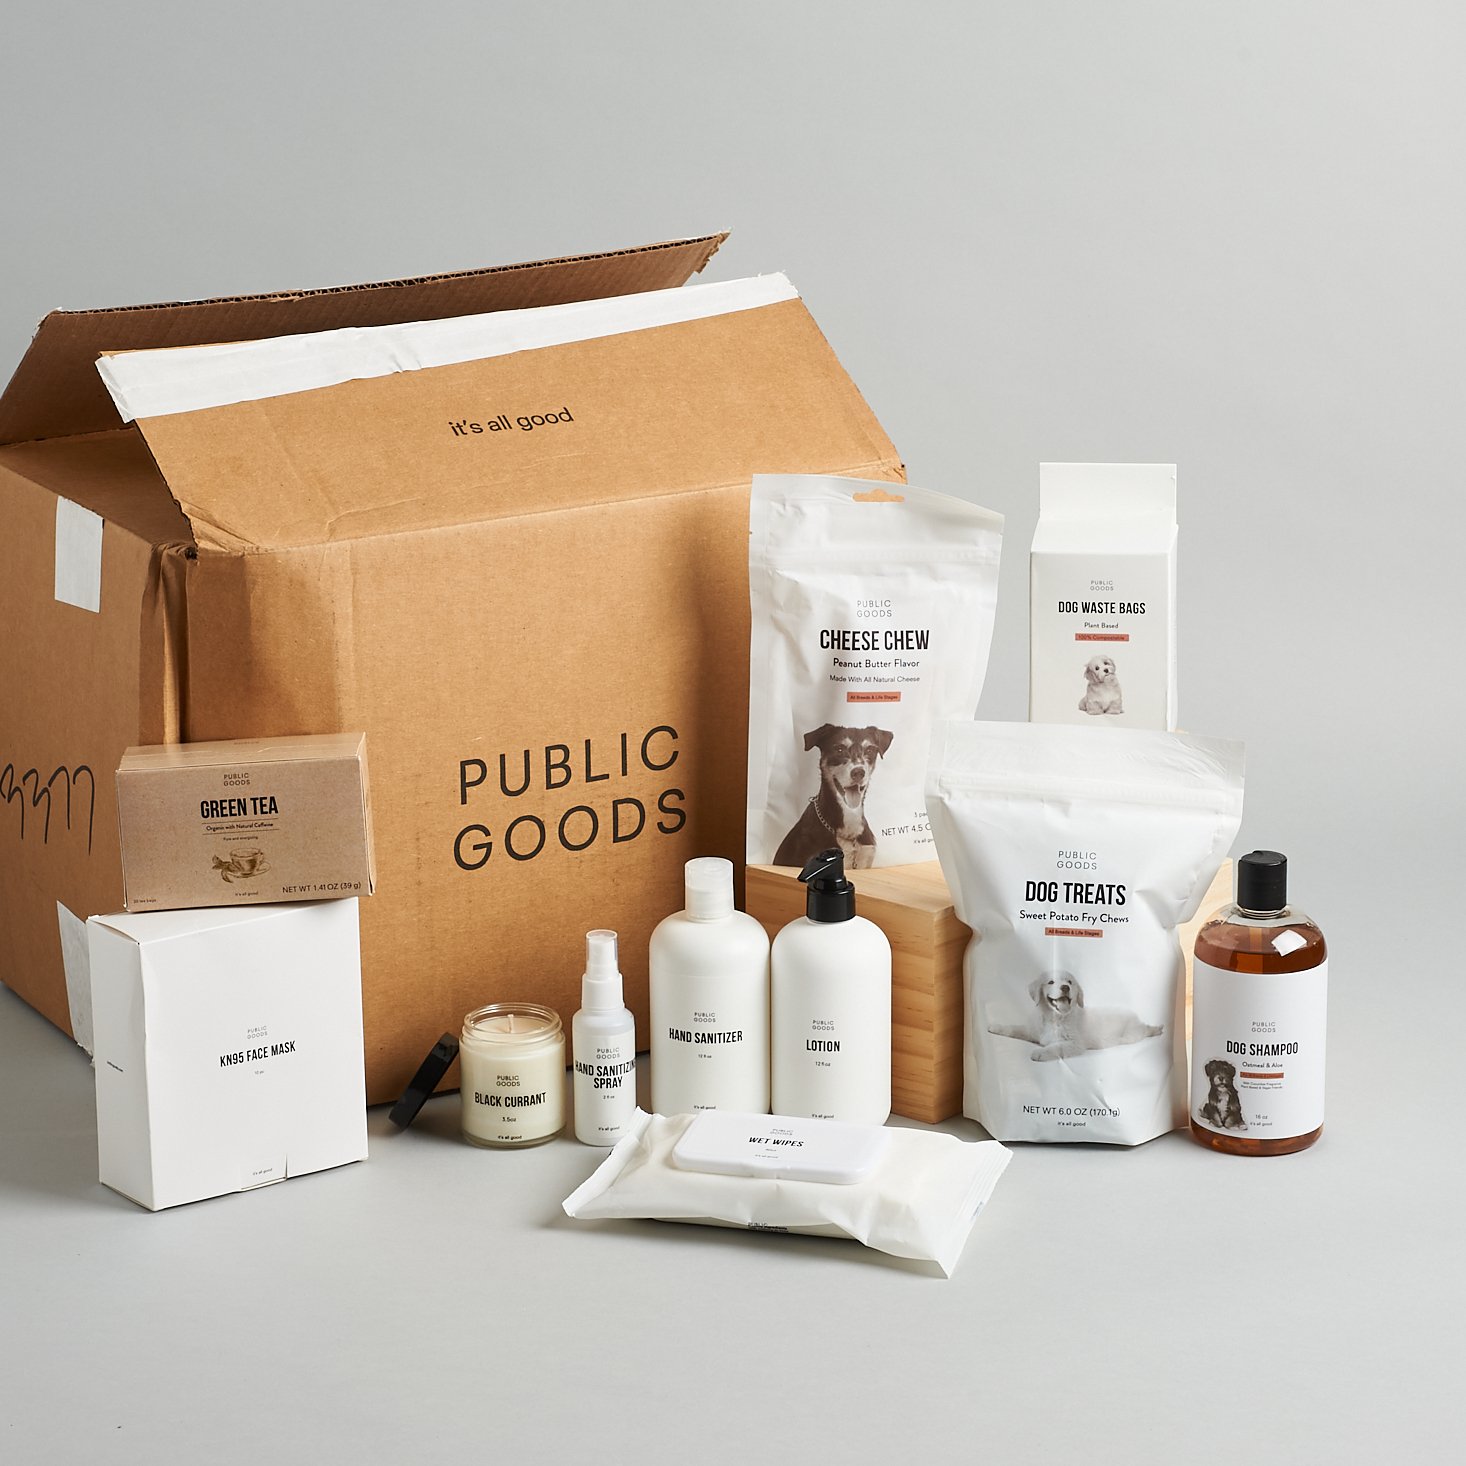 Public Goods Pet & Personal Care Items: Testing Out Their Latest Products